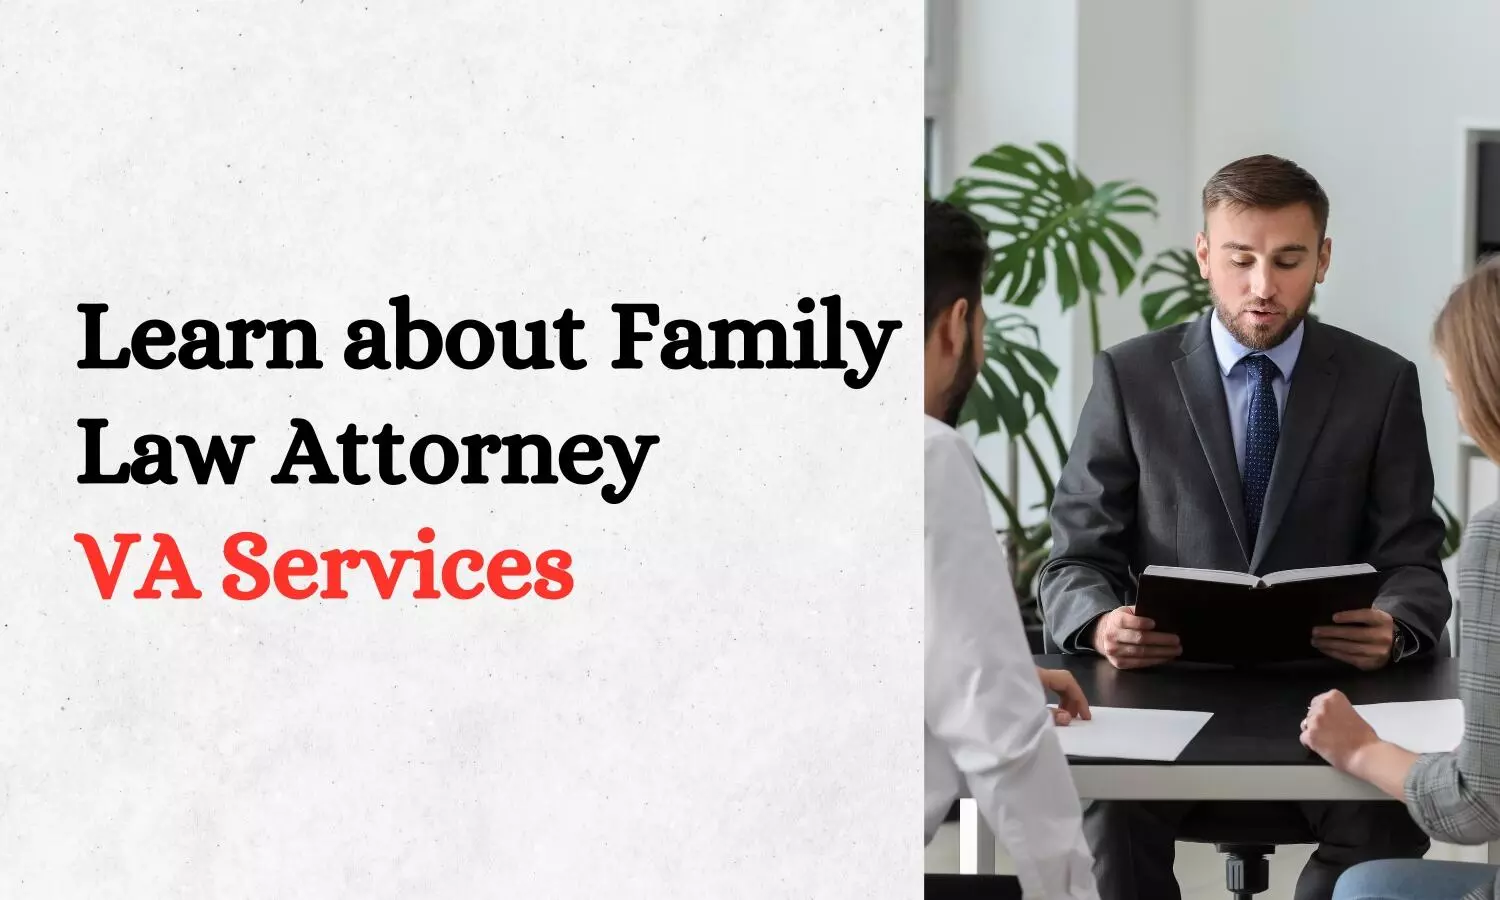 Learn about Family Law Attorney VA Services